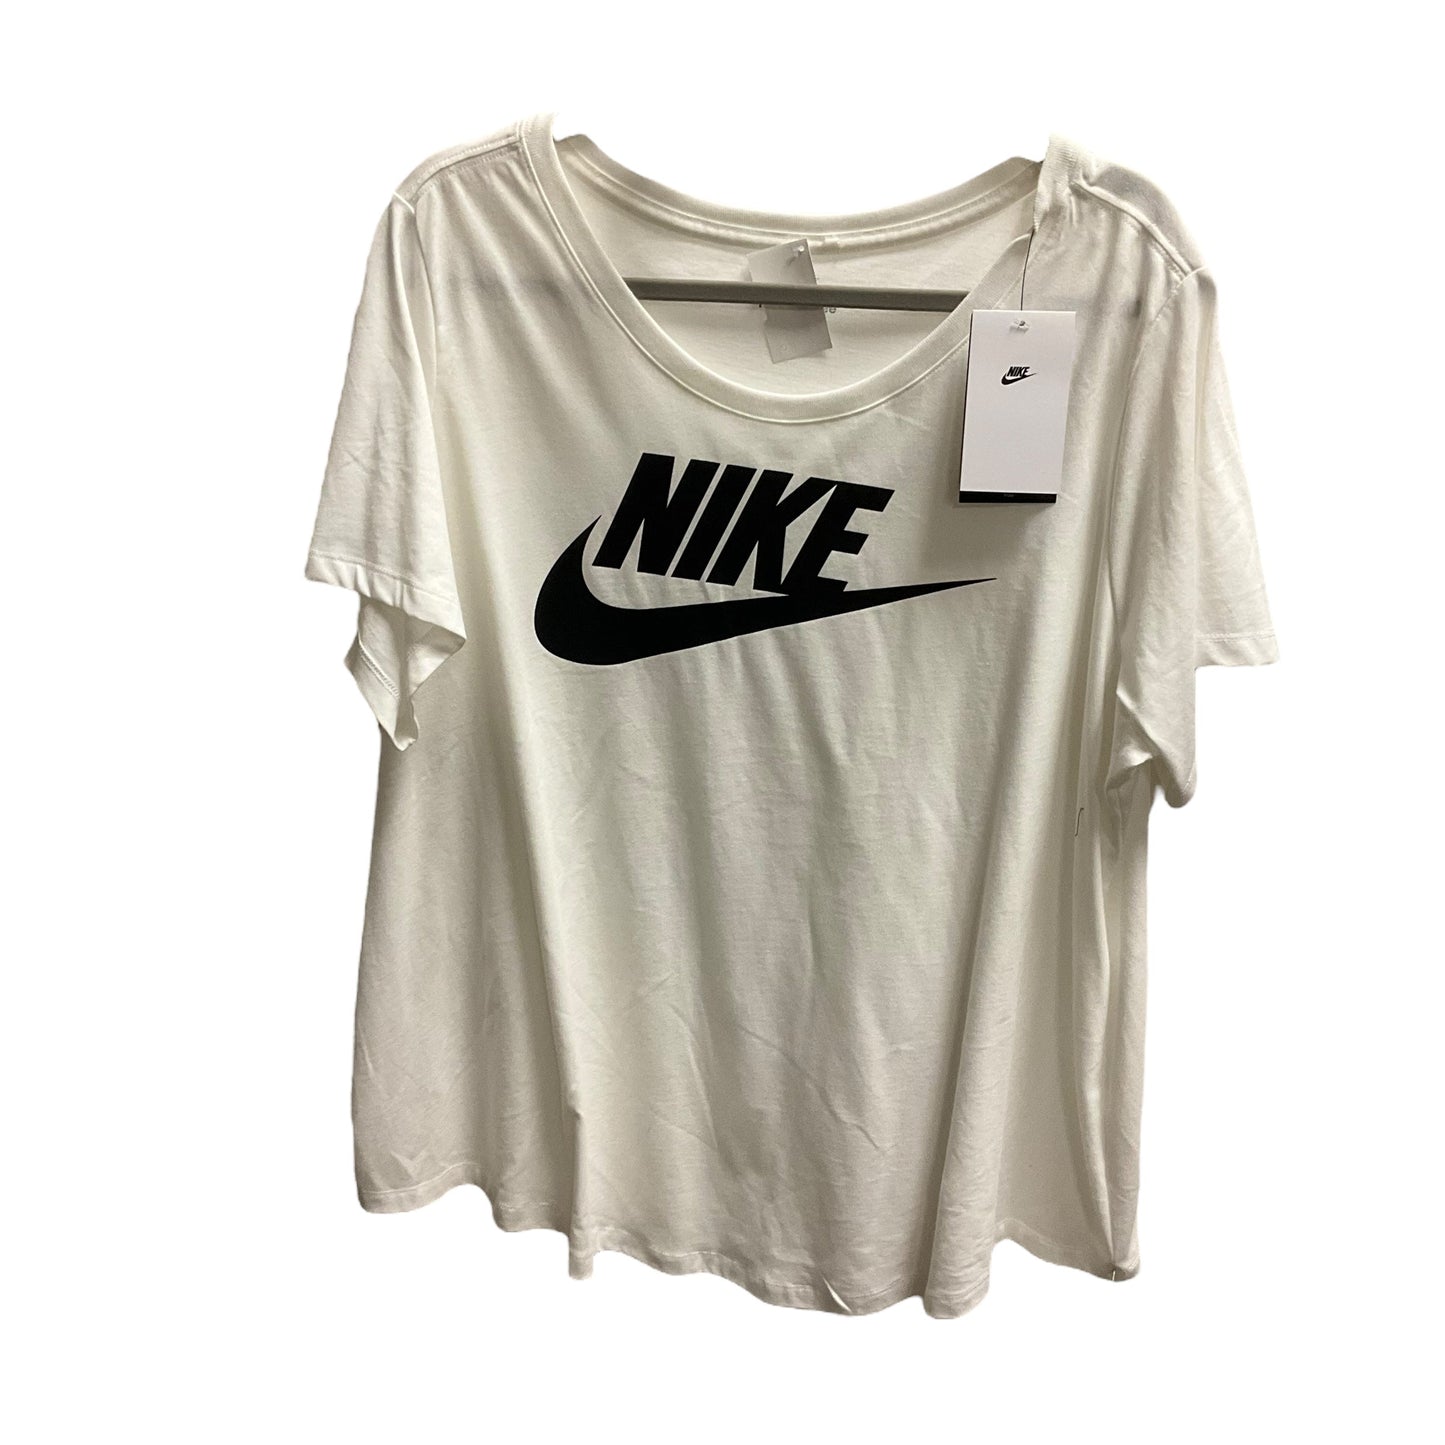 White Athletic Top Short Sleeve Nike Apparel, Size 2x